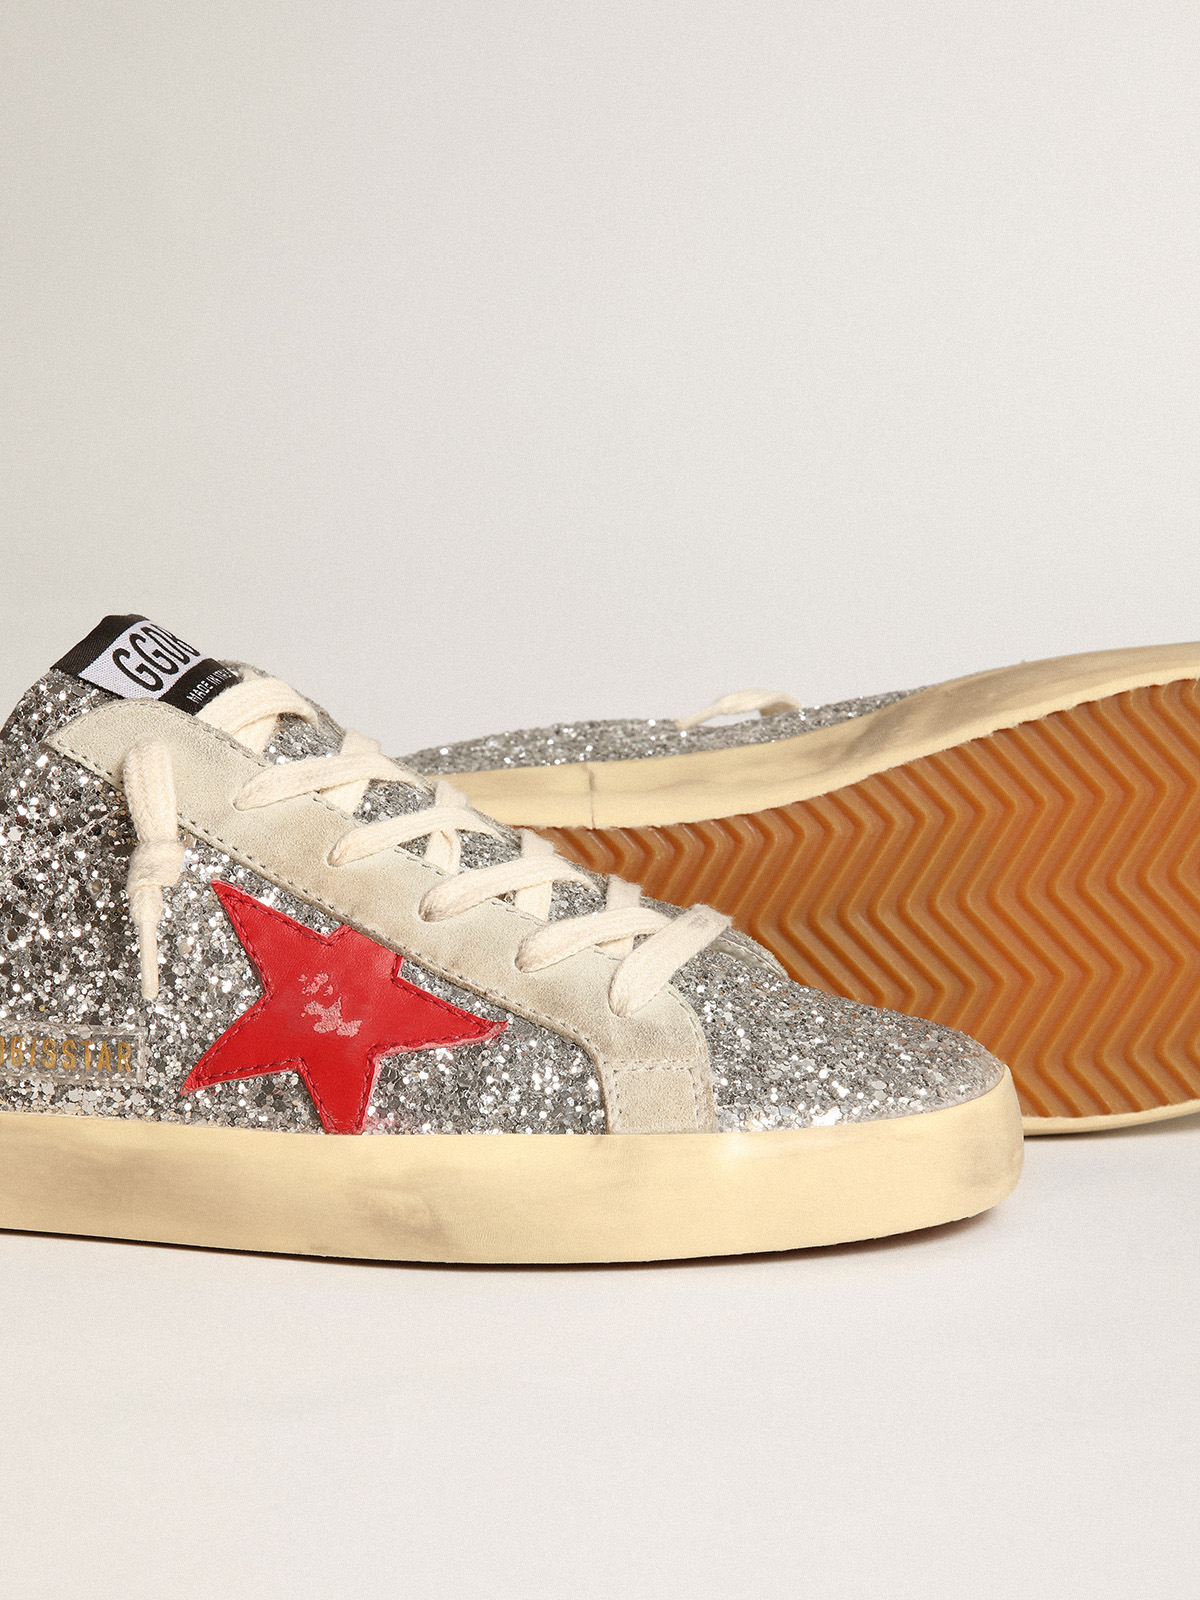 Women's Super-Star Sabot in silver glitter with red leather star